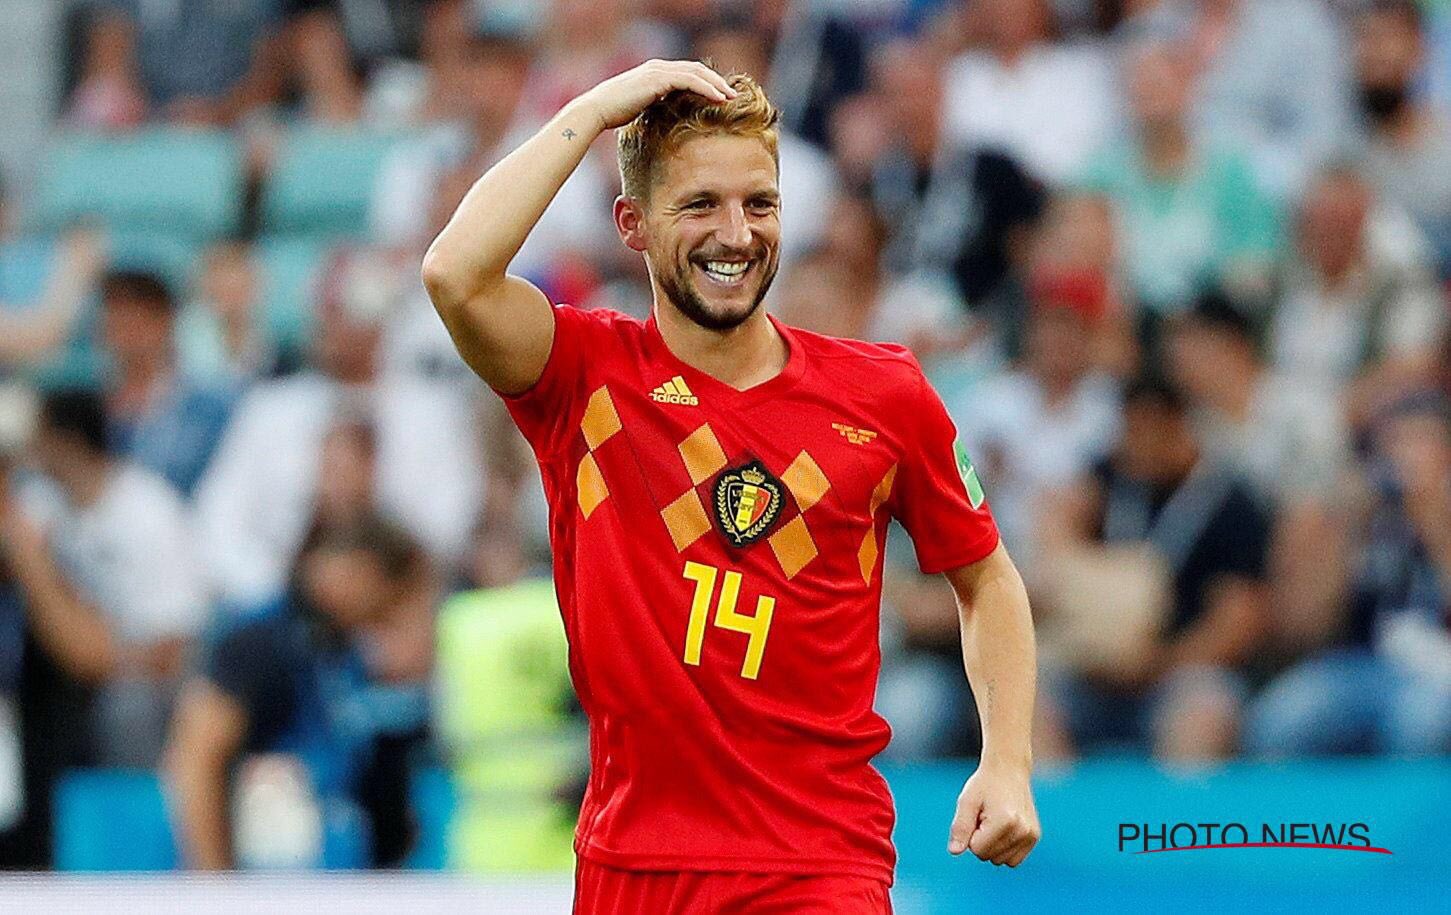 Dries Mertens on Twitter: "Blondes have more fun! 🇧🇪 #REDTOGETHER…